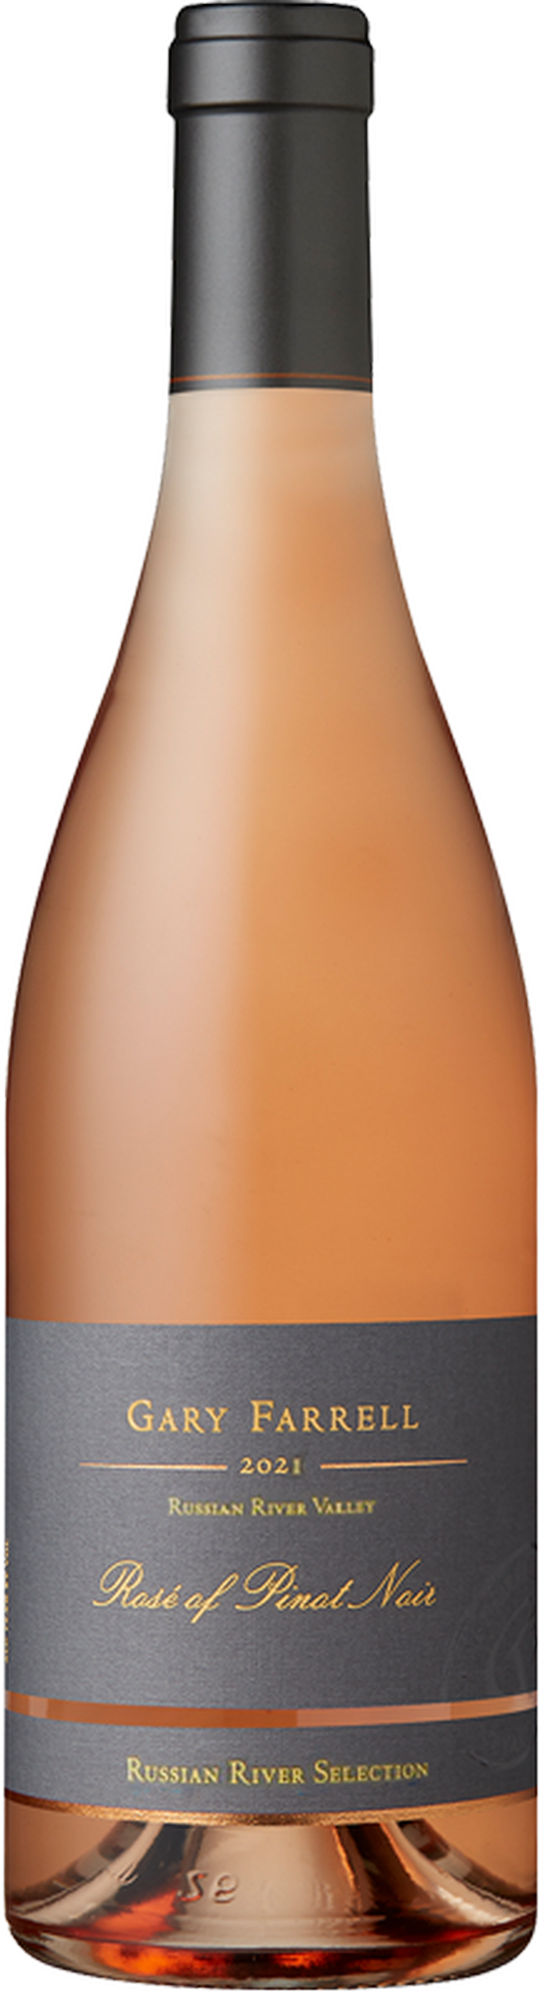 2021 Russian River Selection Rose of Pinot Noir